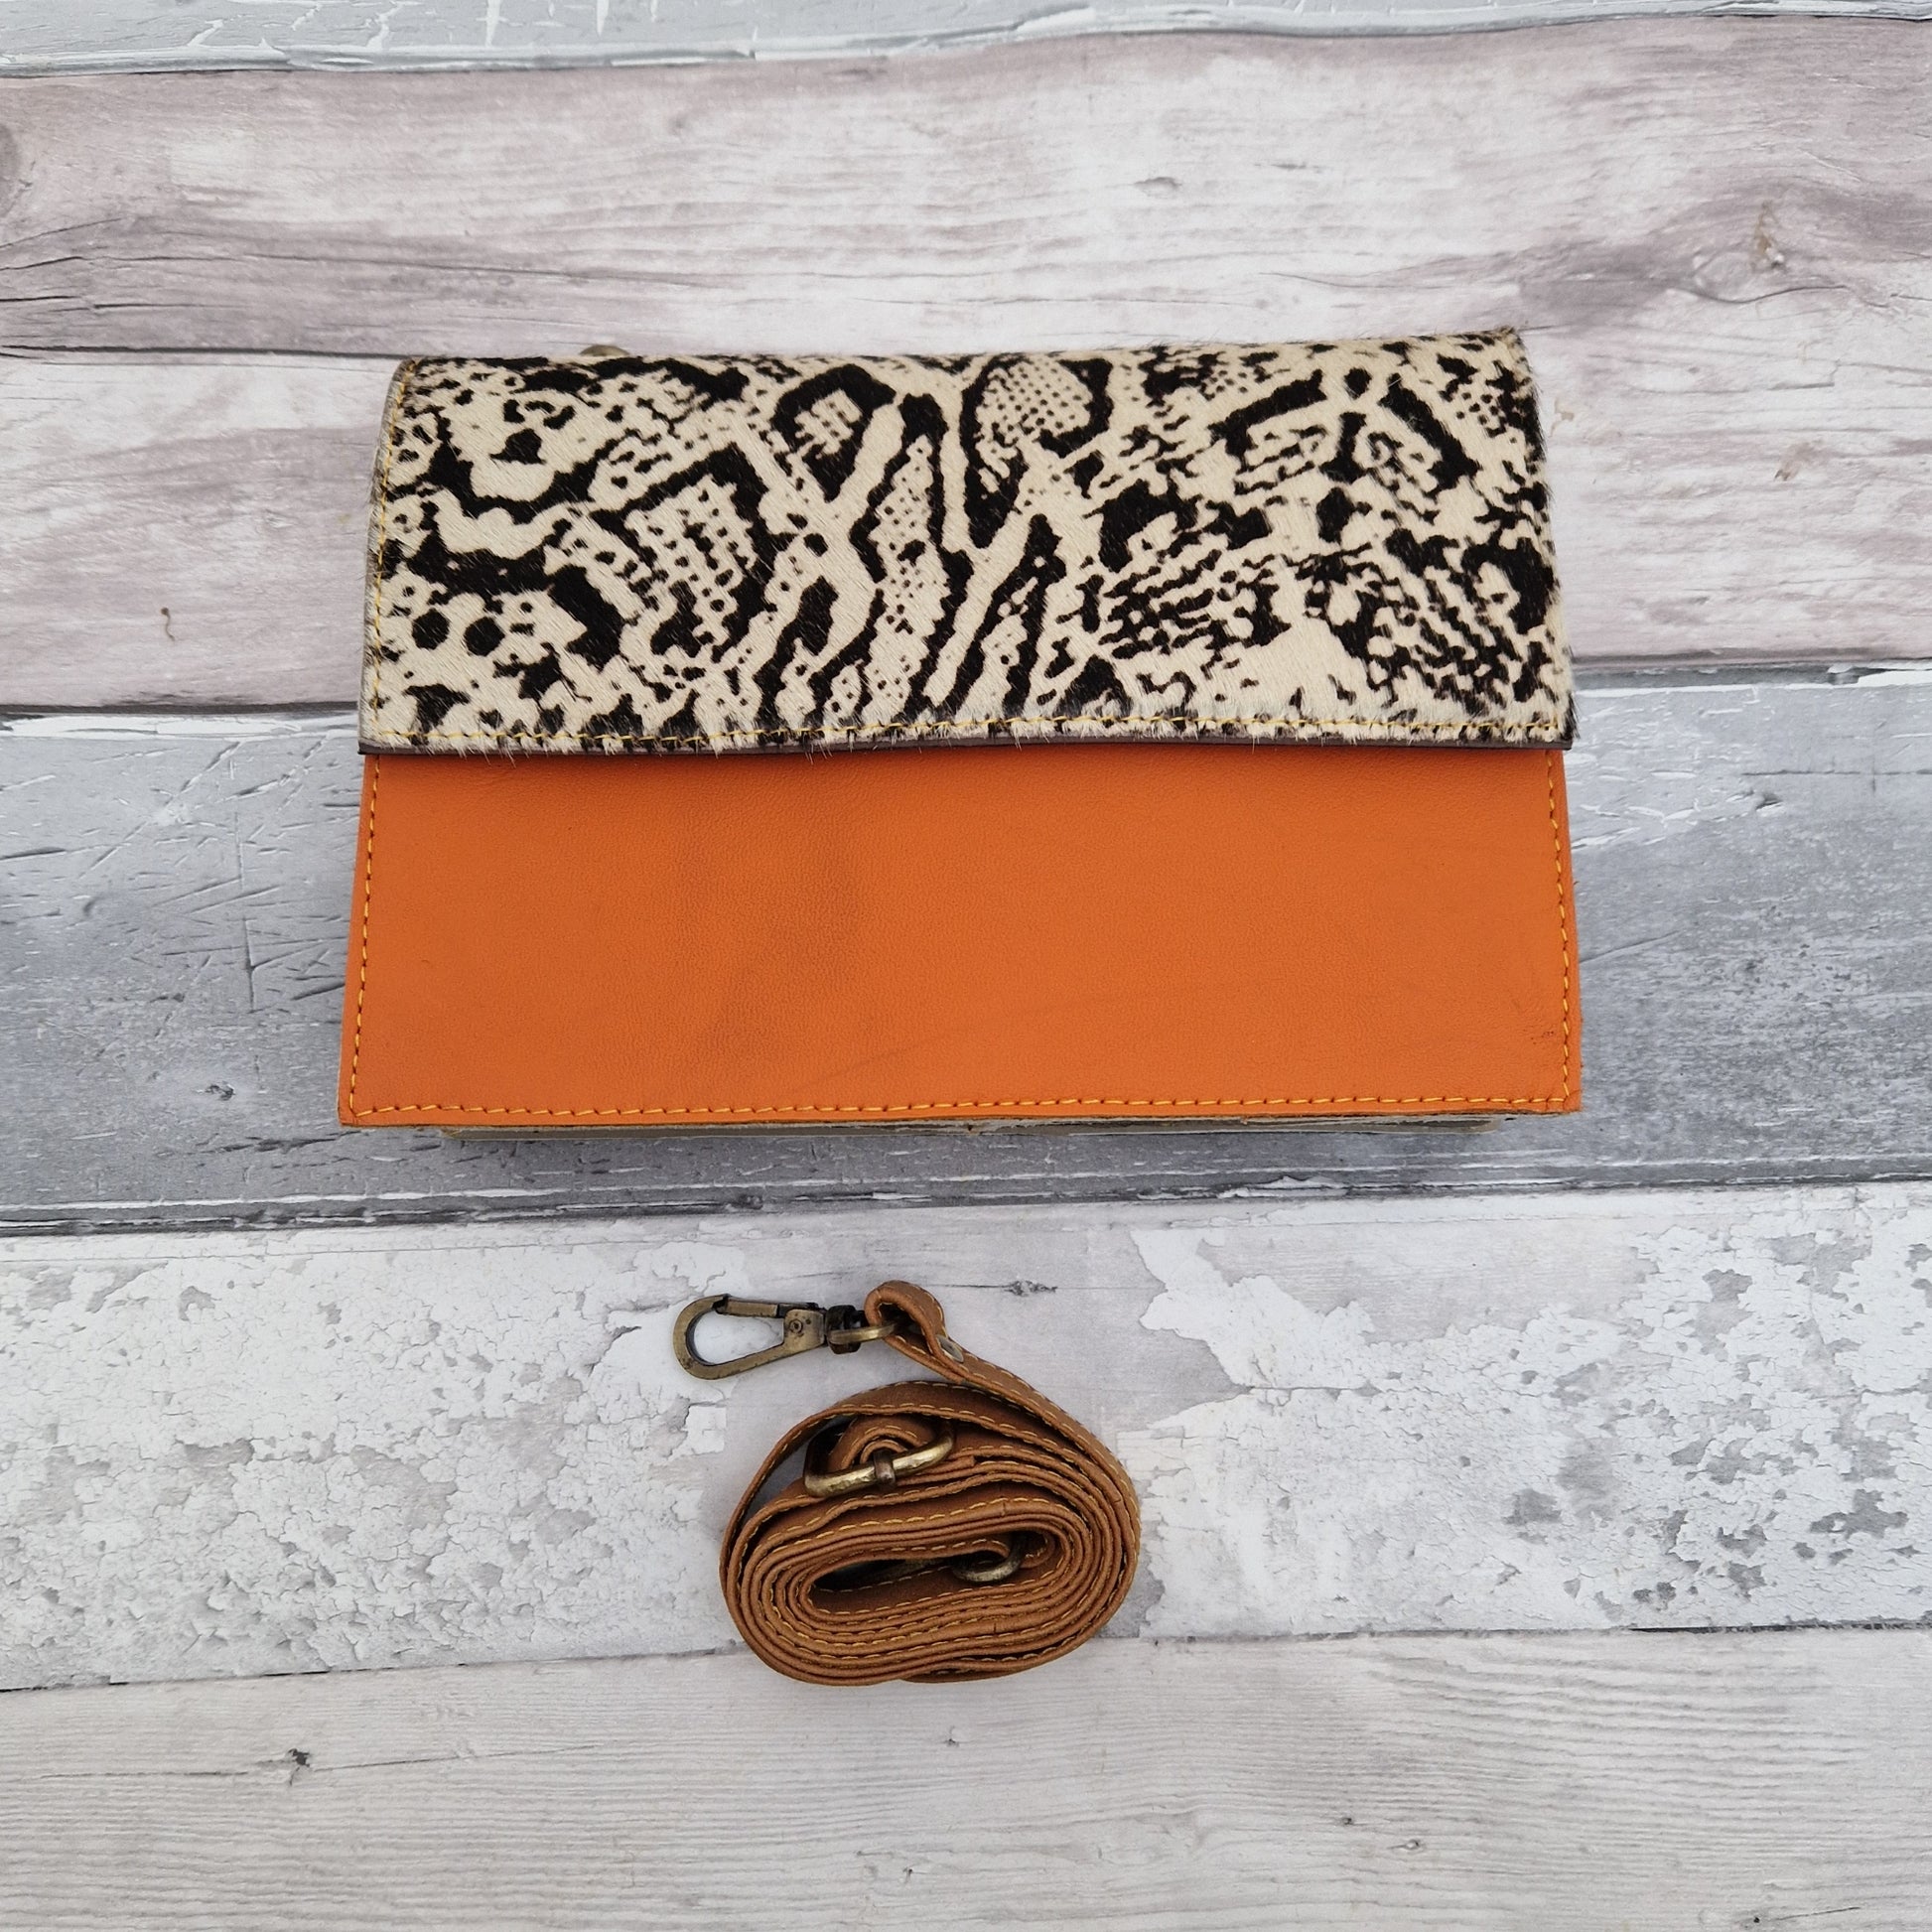 Orange Leather bag with a snake print panel in black and white.